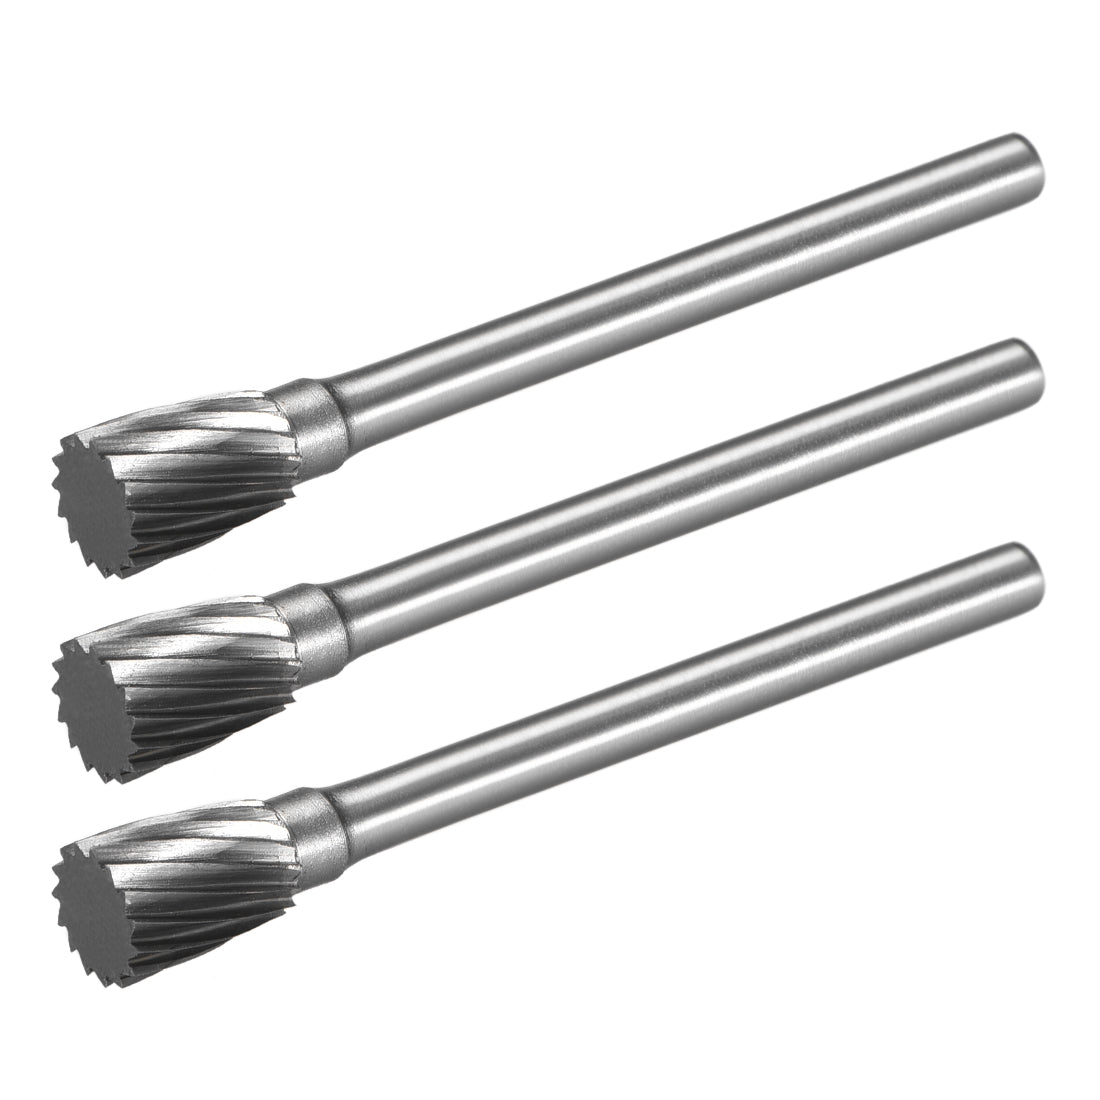 uxcell Uxcell Tungsten Carbide Single Cut Rotary File Cylinder Shape with 1/8" Shank 3pcs